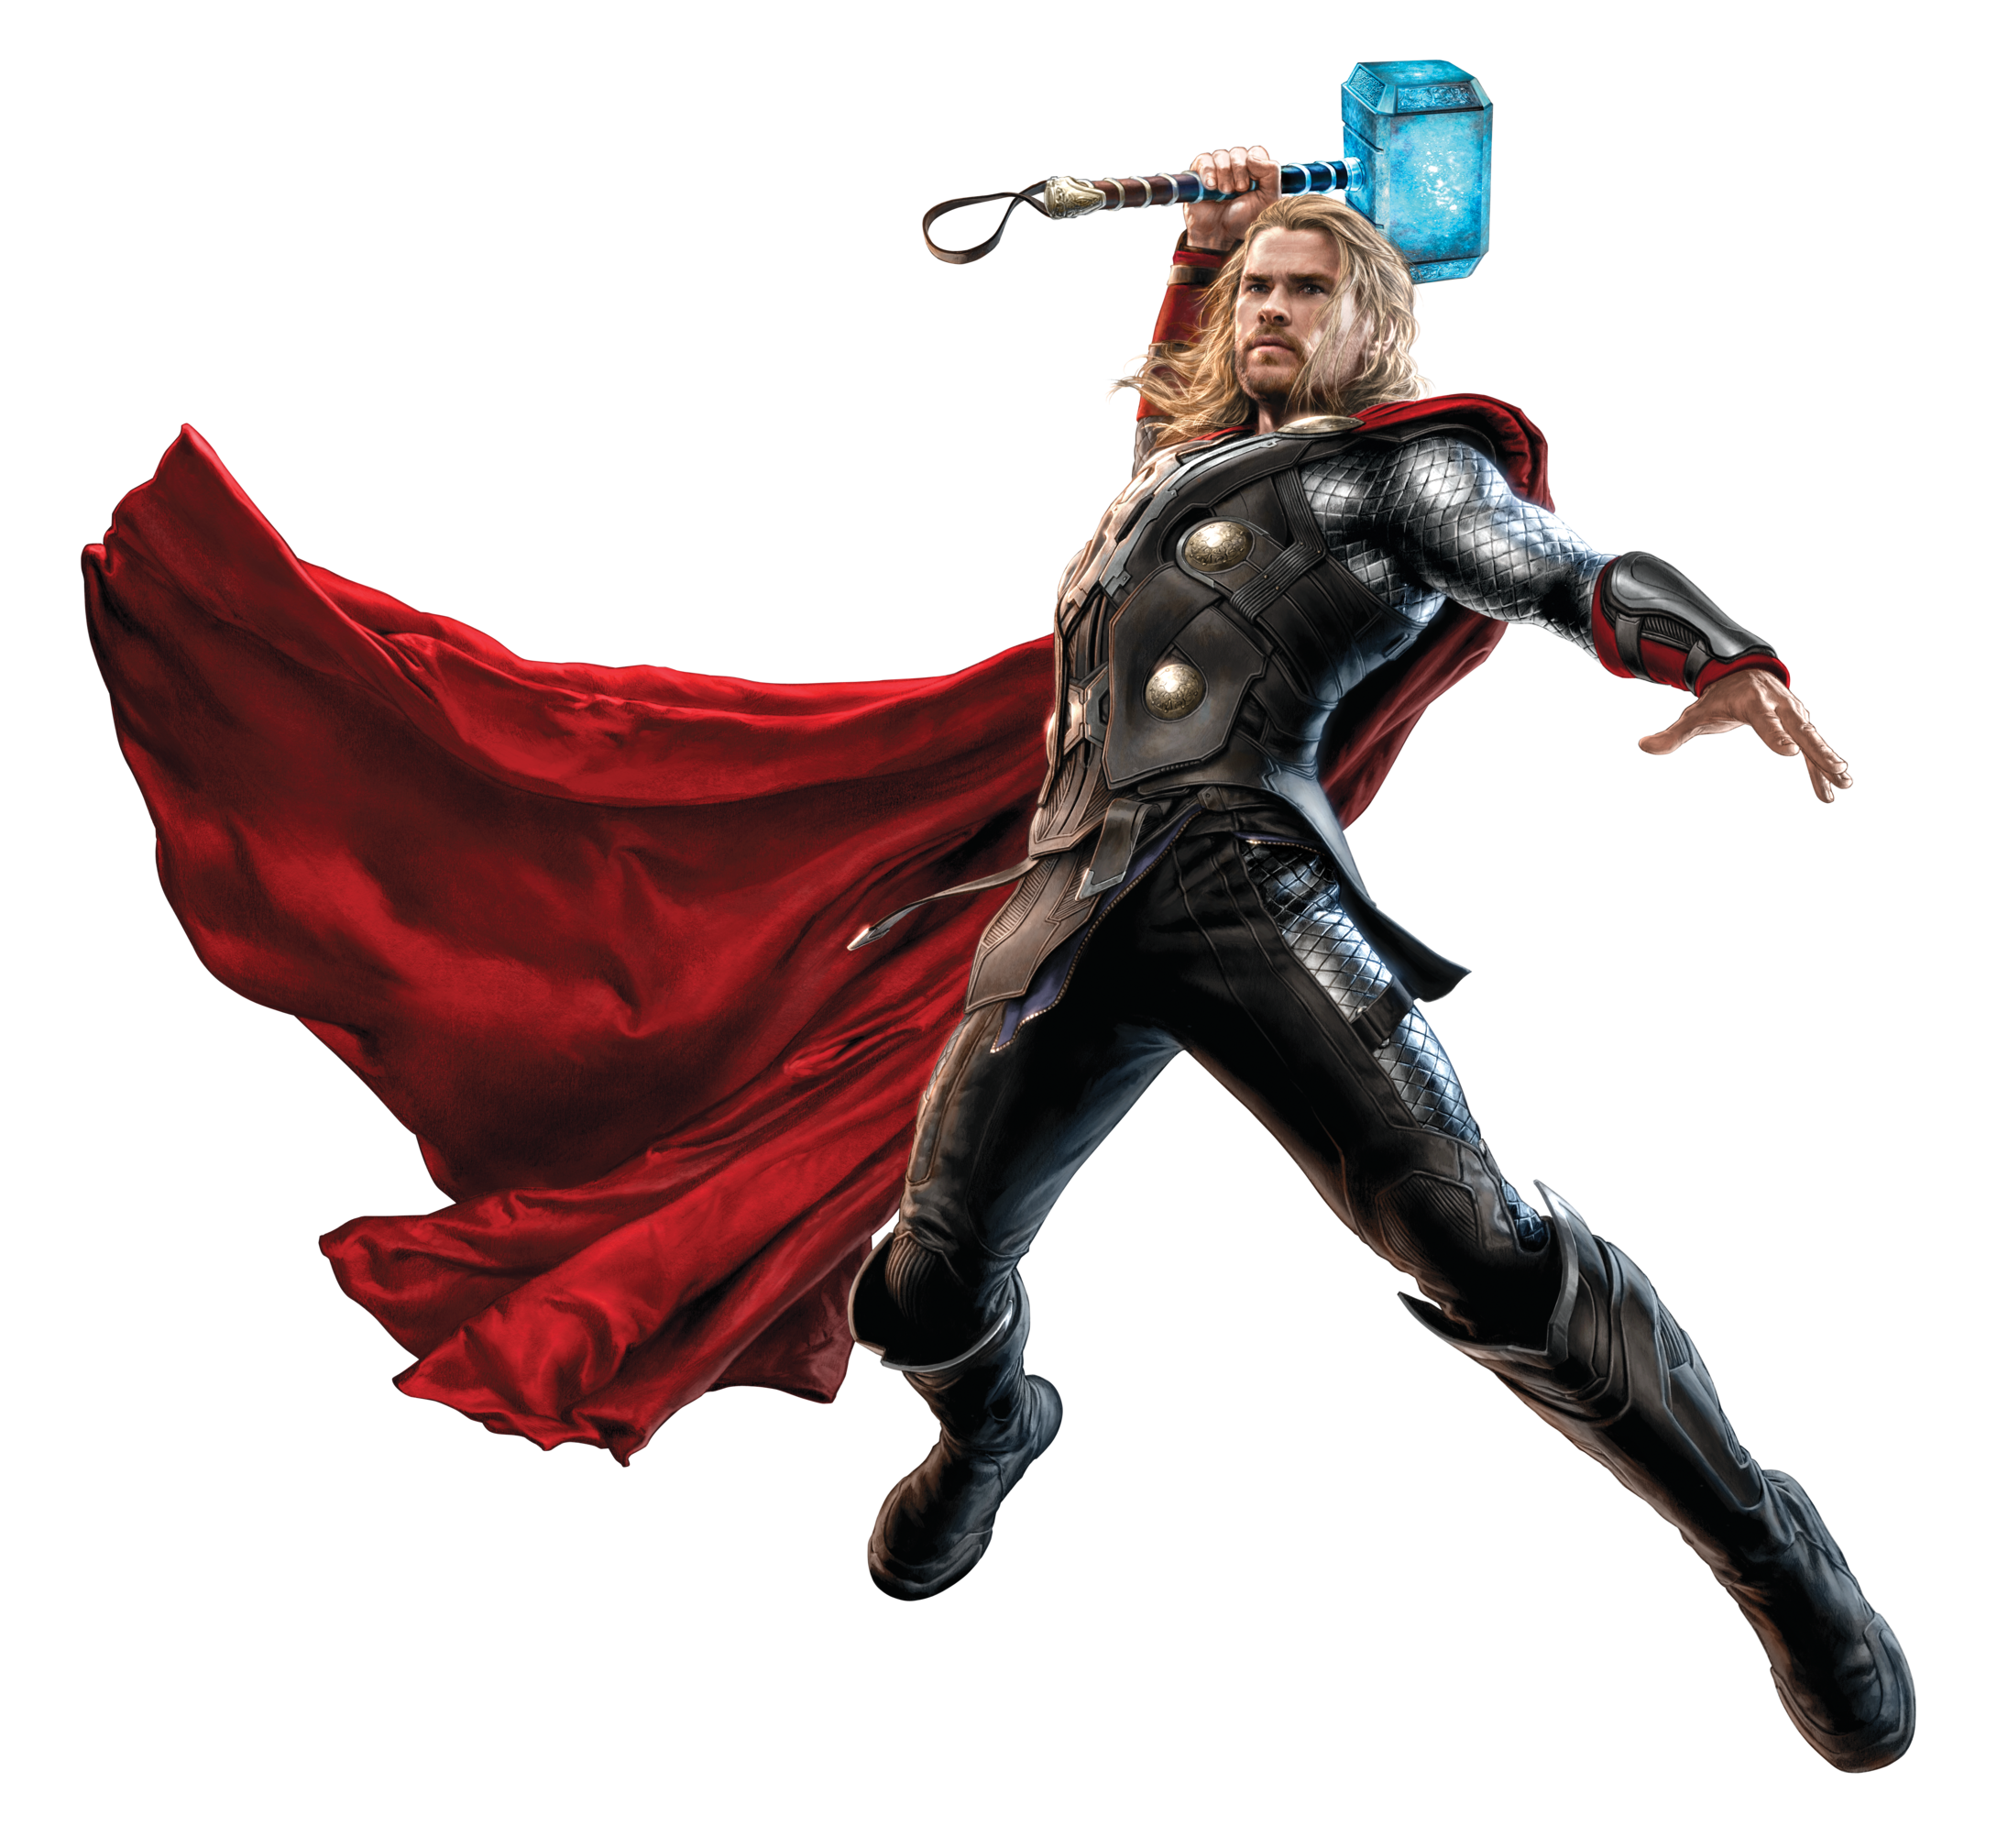 Thor Fighting with his Hammer